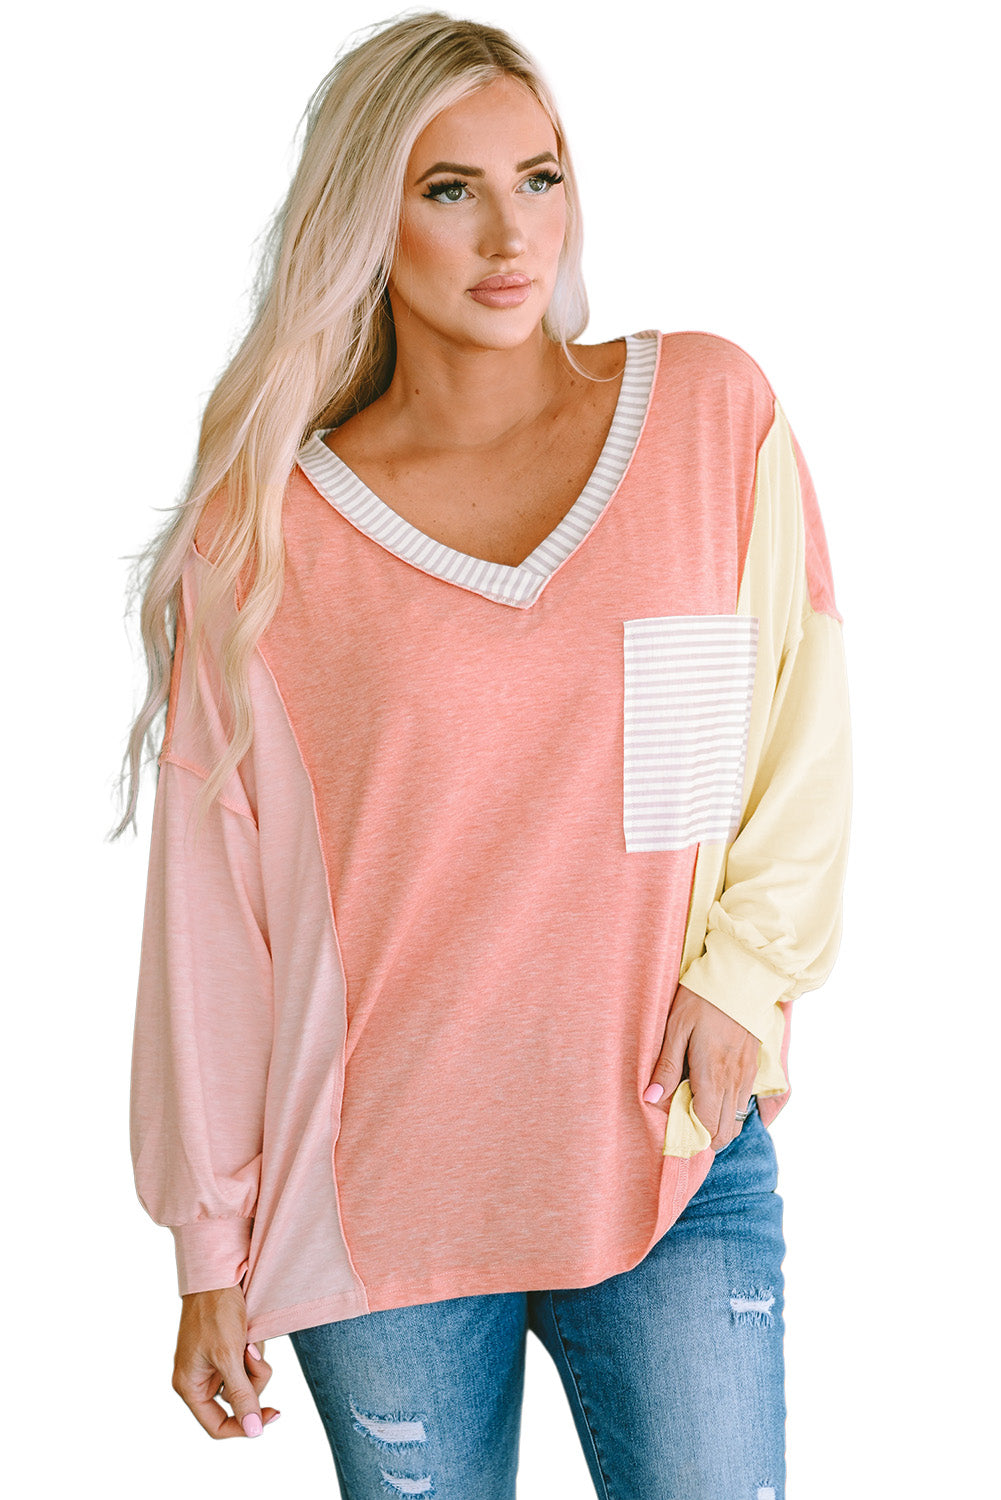 Striped Color Block Splicing Long Sleeve T Shirt